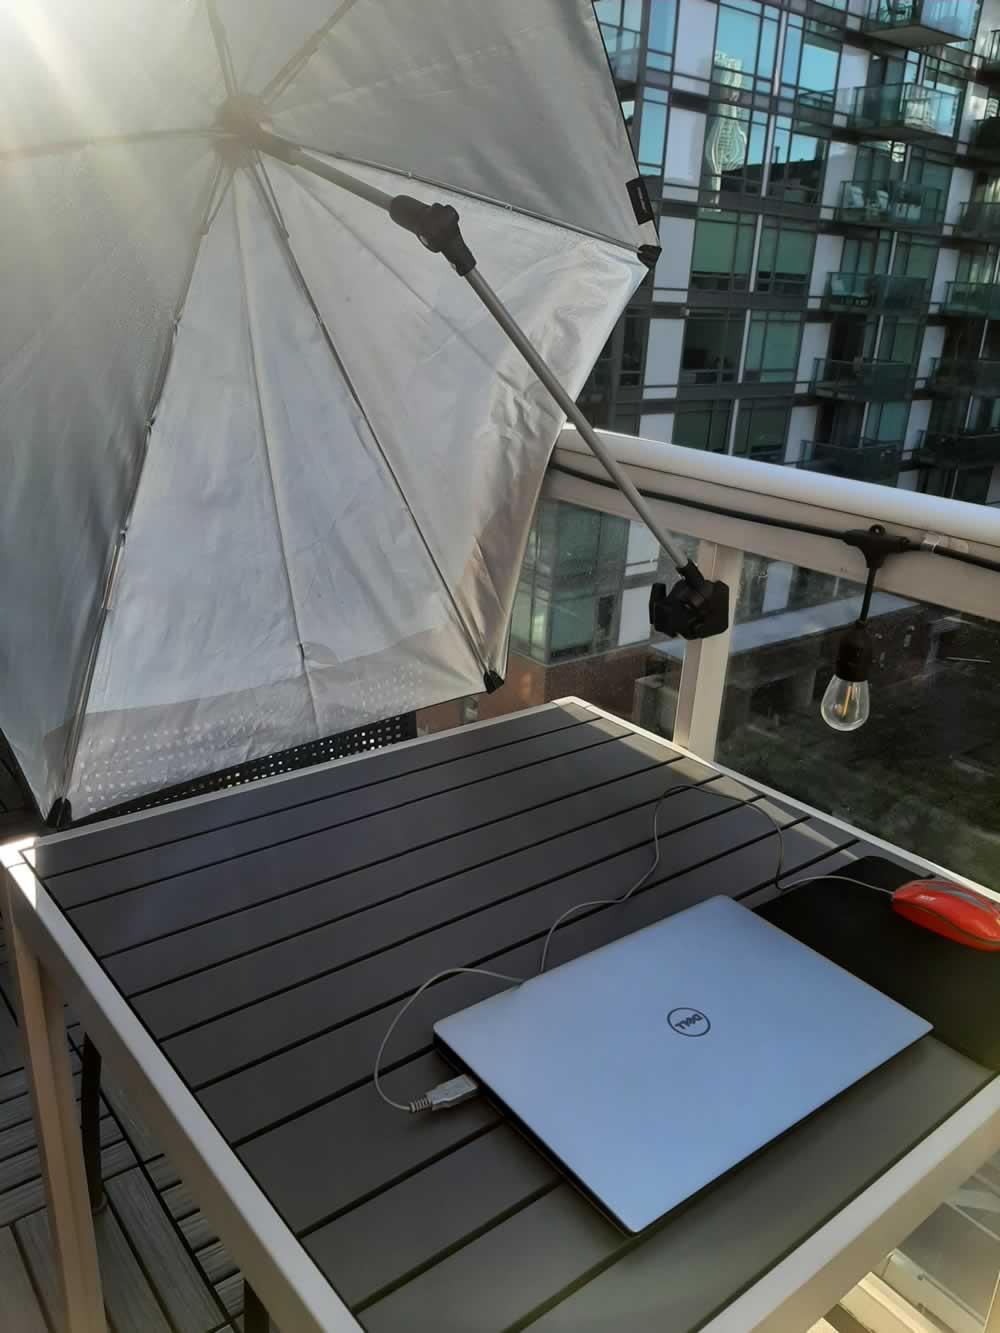 Balcony umbrella providing full shade for working, with sun coming from the east.